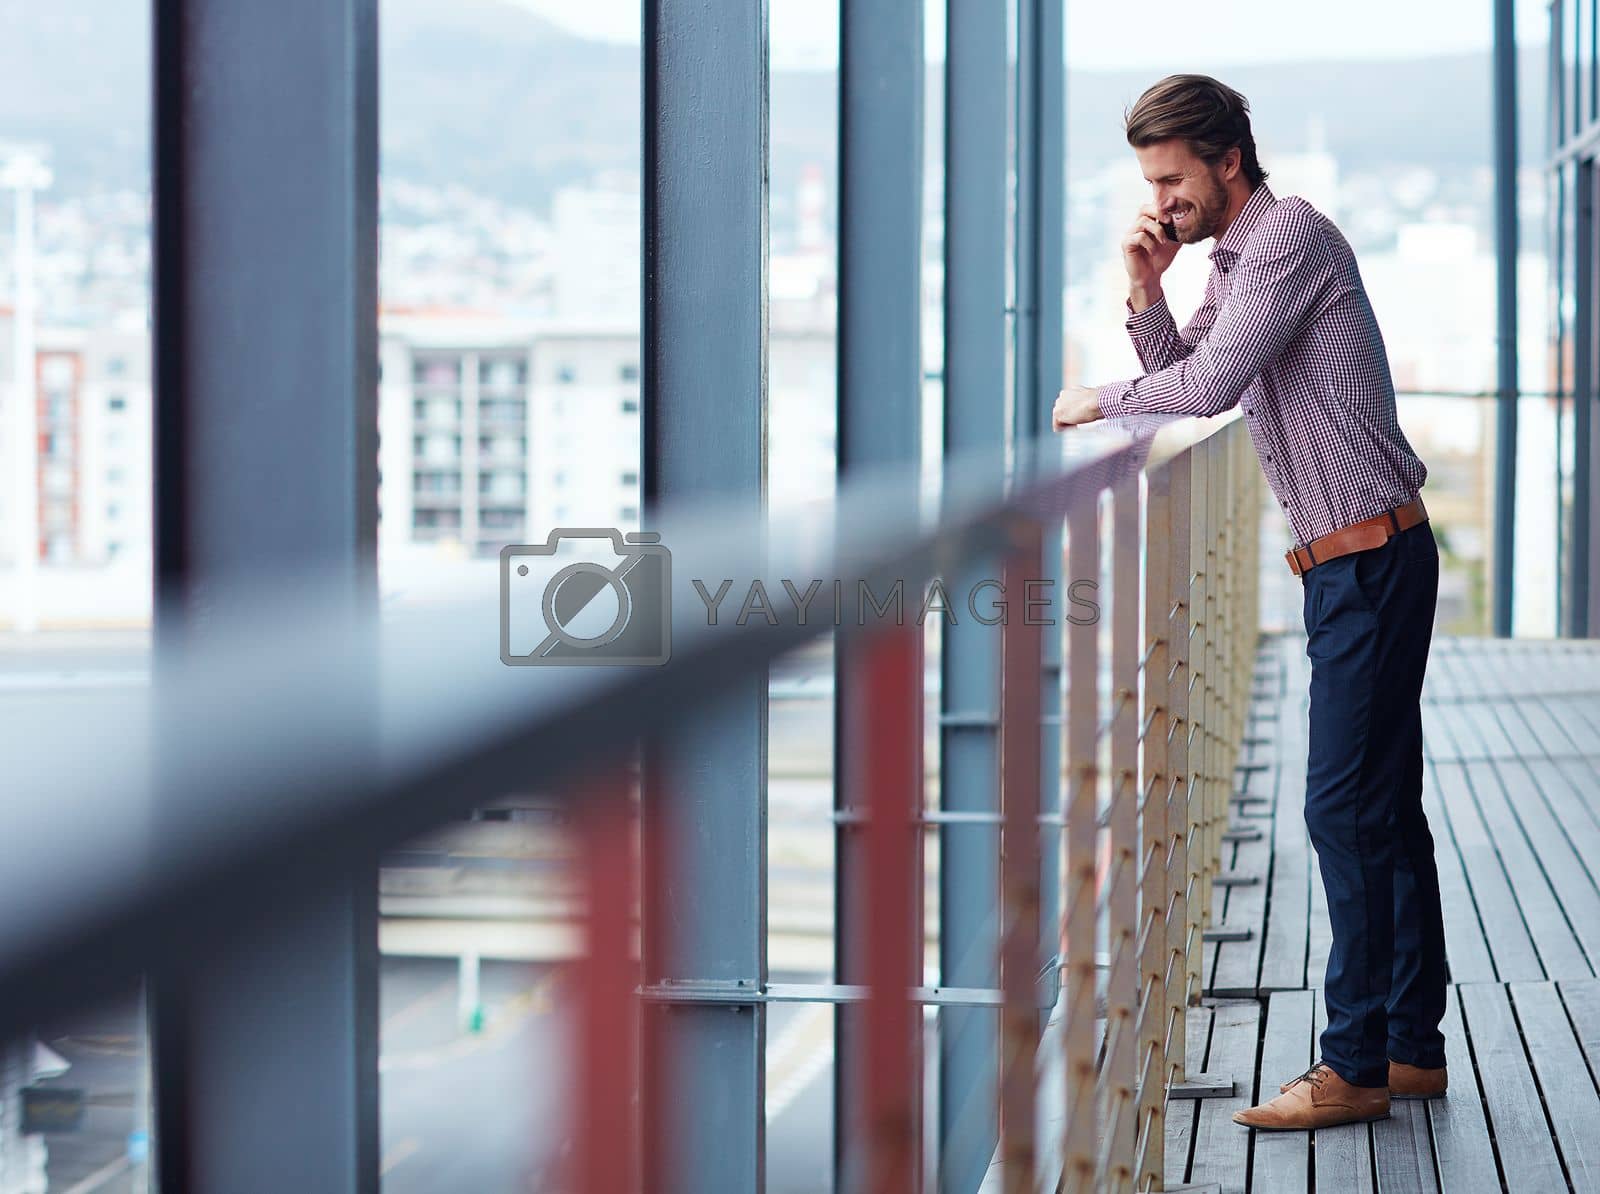 Effective communication makes for effortless business. a young businessman talking on a phone outside of an office building